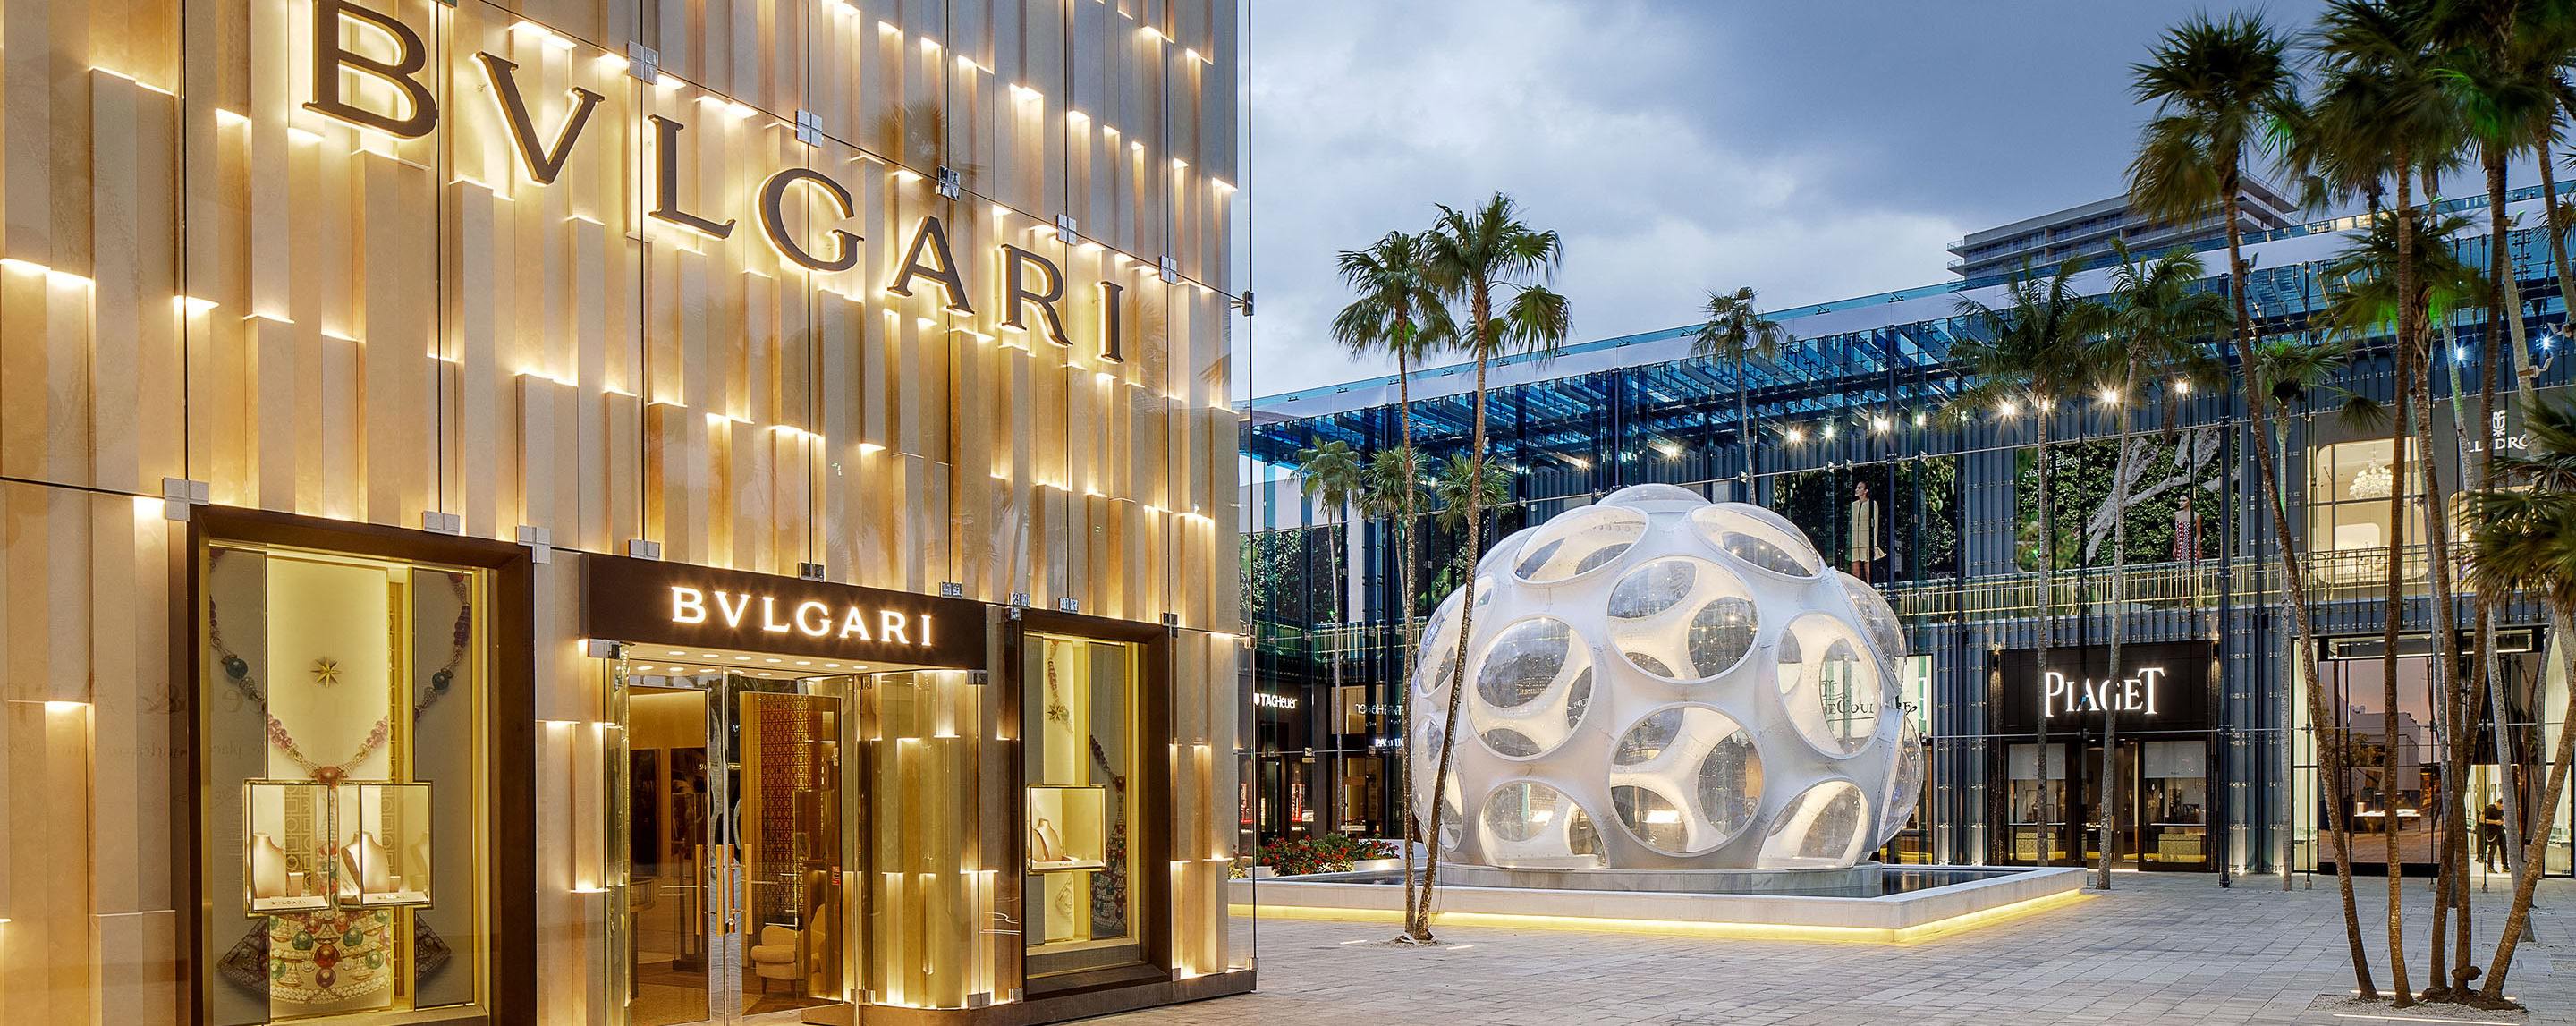 A large white sculpture stands to the side of a well lit Bvlgari storefront at twilight.